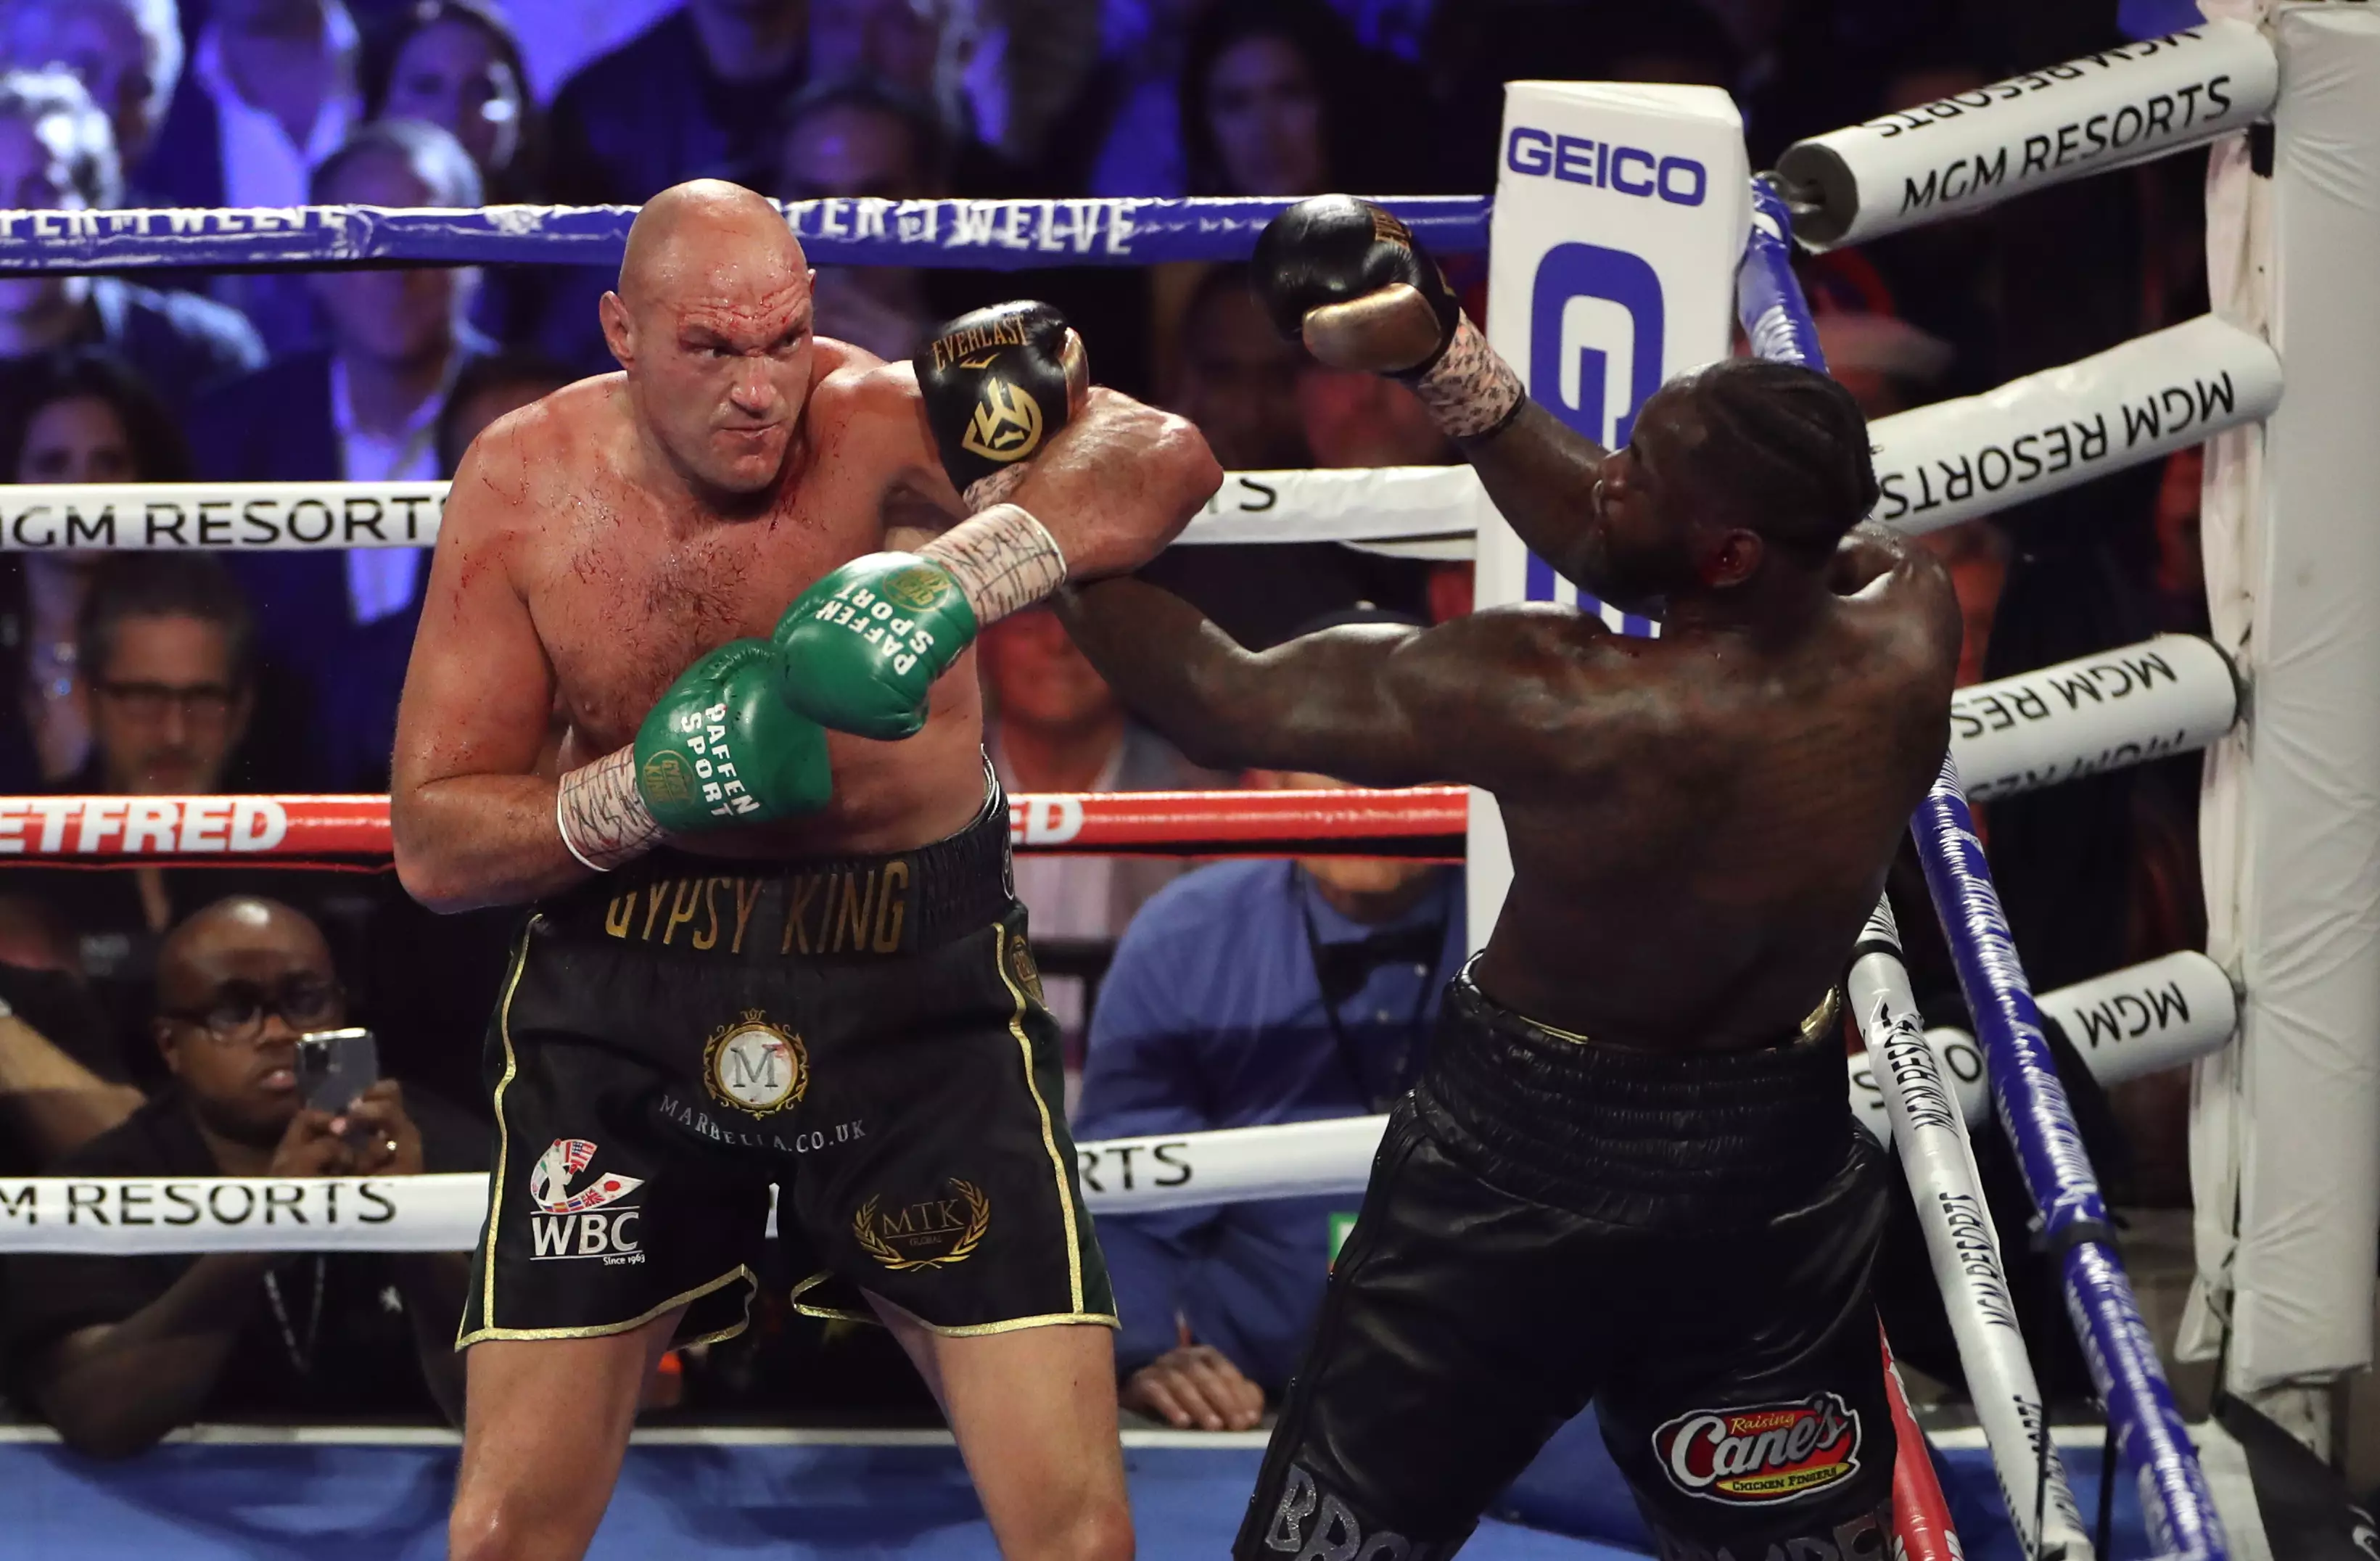 The unification bout will crown the best heavyweight boxer on the planet